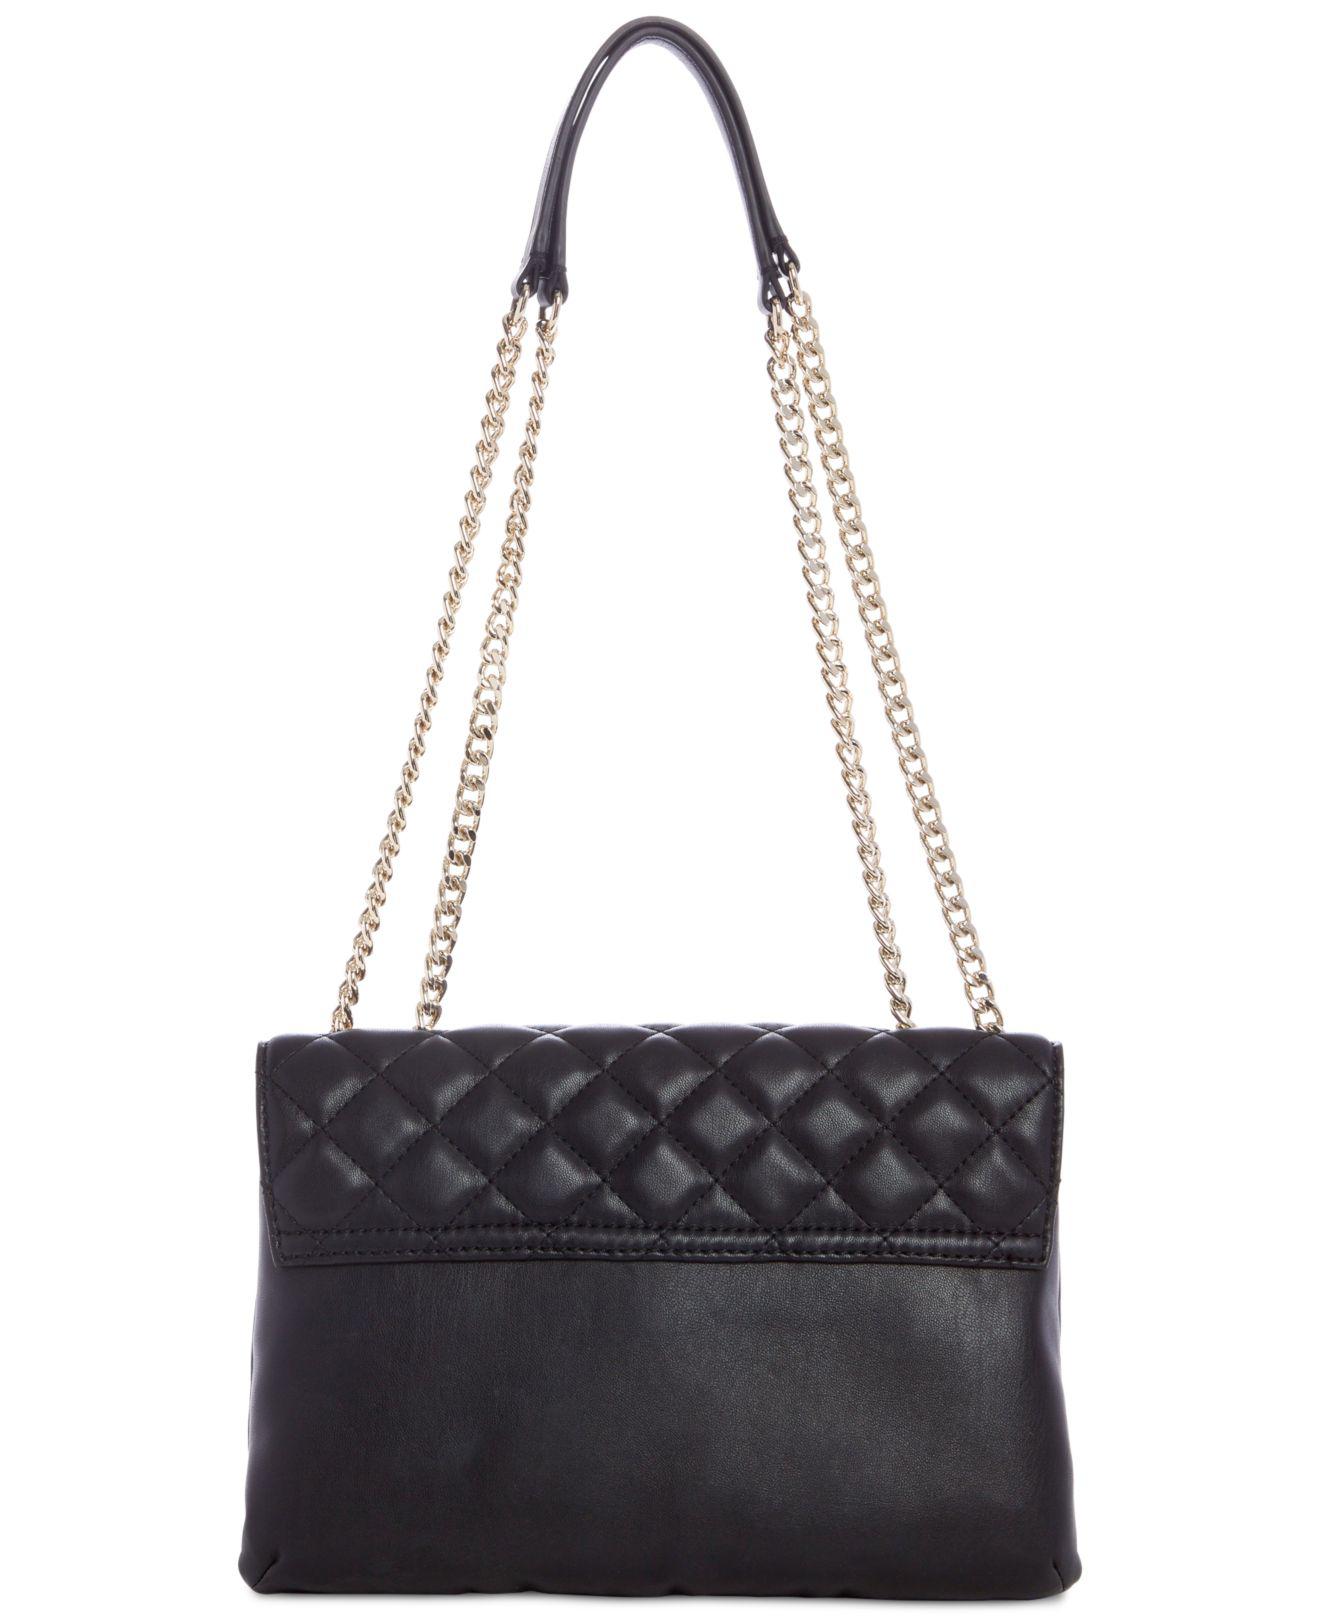 Guess Victoria Chain Shoulder Bag in Black | Lyst